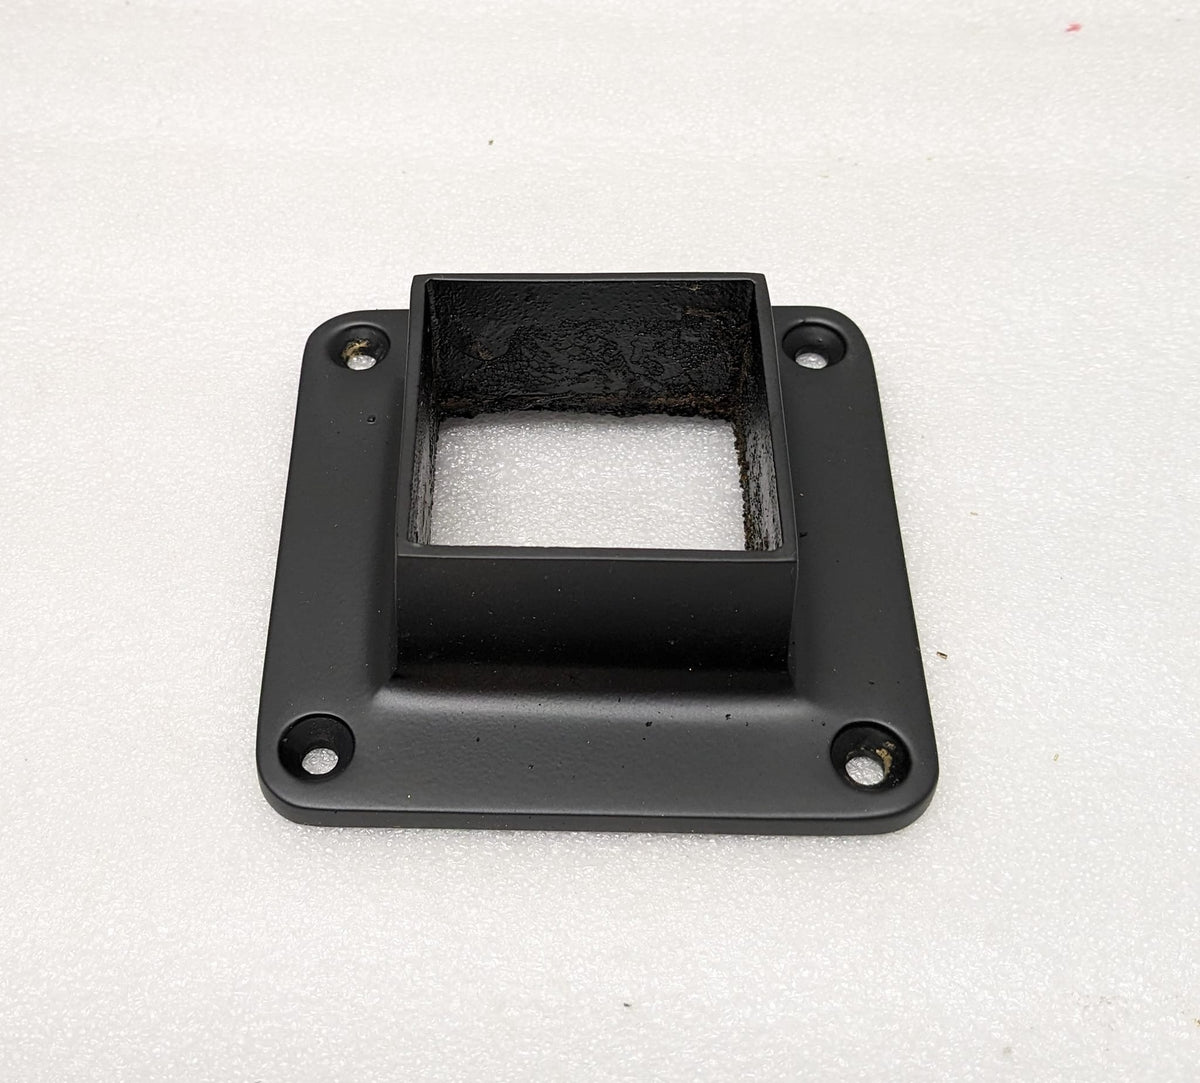 Square Flange For 2" Square Tubing Flanges and Anchors, Square for Square Tubing Matte-Black-Powder-Coated-Finish Trade Diversified